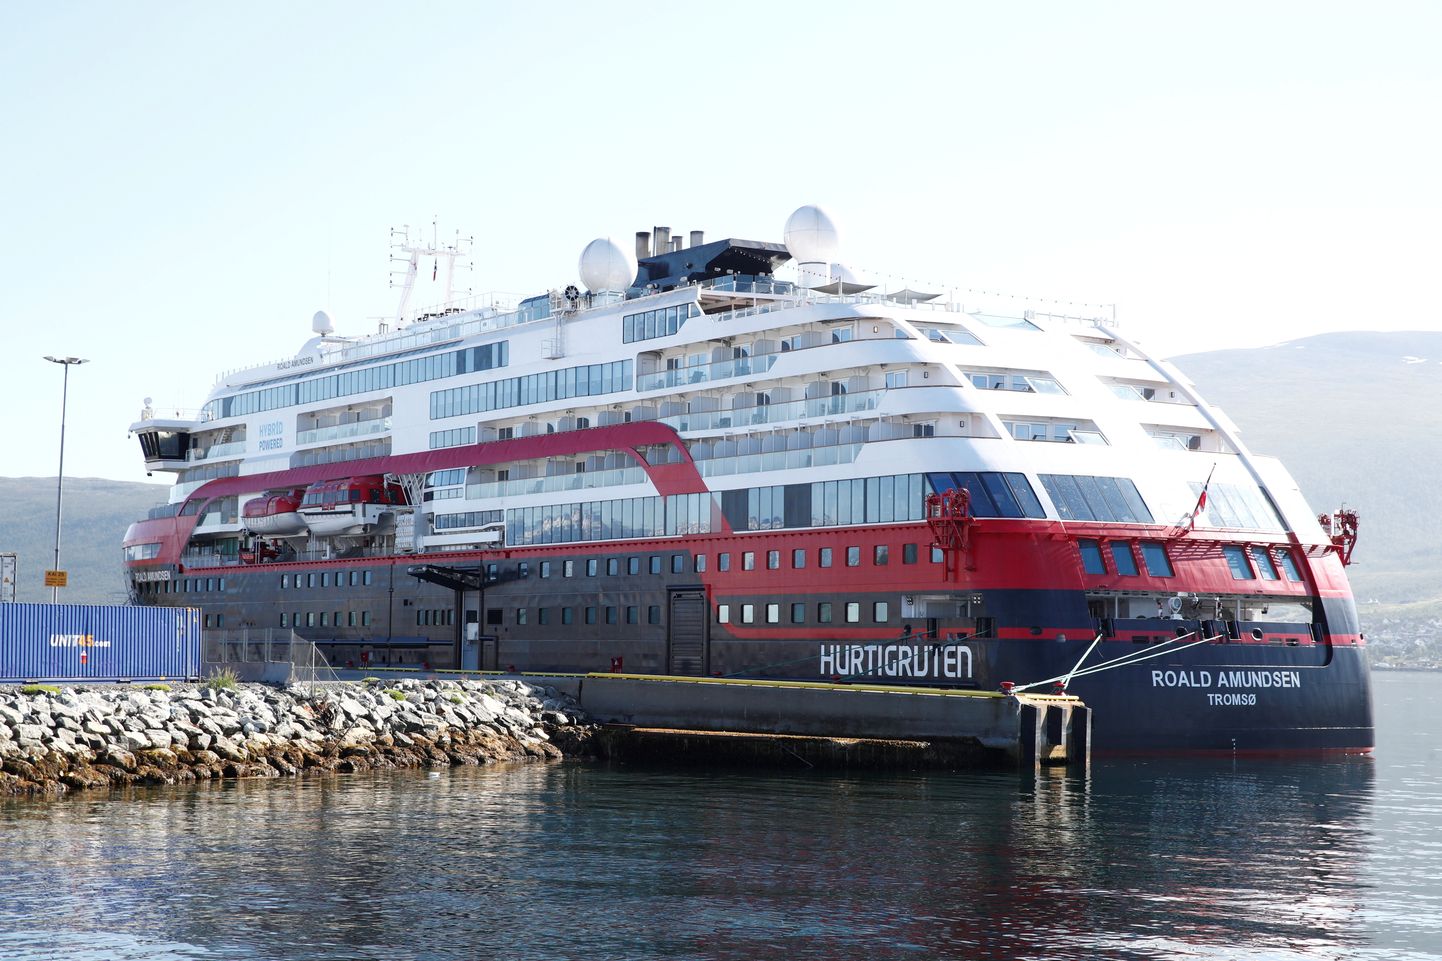 FILE PHOTO: The Hurtigruten cruise liner MS Roald Amundsen is moored due the coronavirus disease (COVID-19) outbreak on board, in Breivika, Tromso, Norway August 3, 2020. Terje Pedersen/NTB Scanpix/via REUTERS   ATTENTION EDITORS - THIS IMAGE WAS PROVIDED BY A THIRD PARTY. NORWAY OUT. NO COMMERCIAL OR EDITORIAL SALES IN NORWAY./File Photo